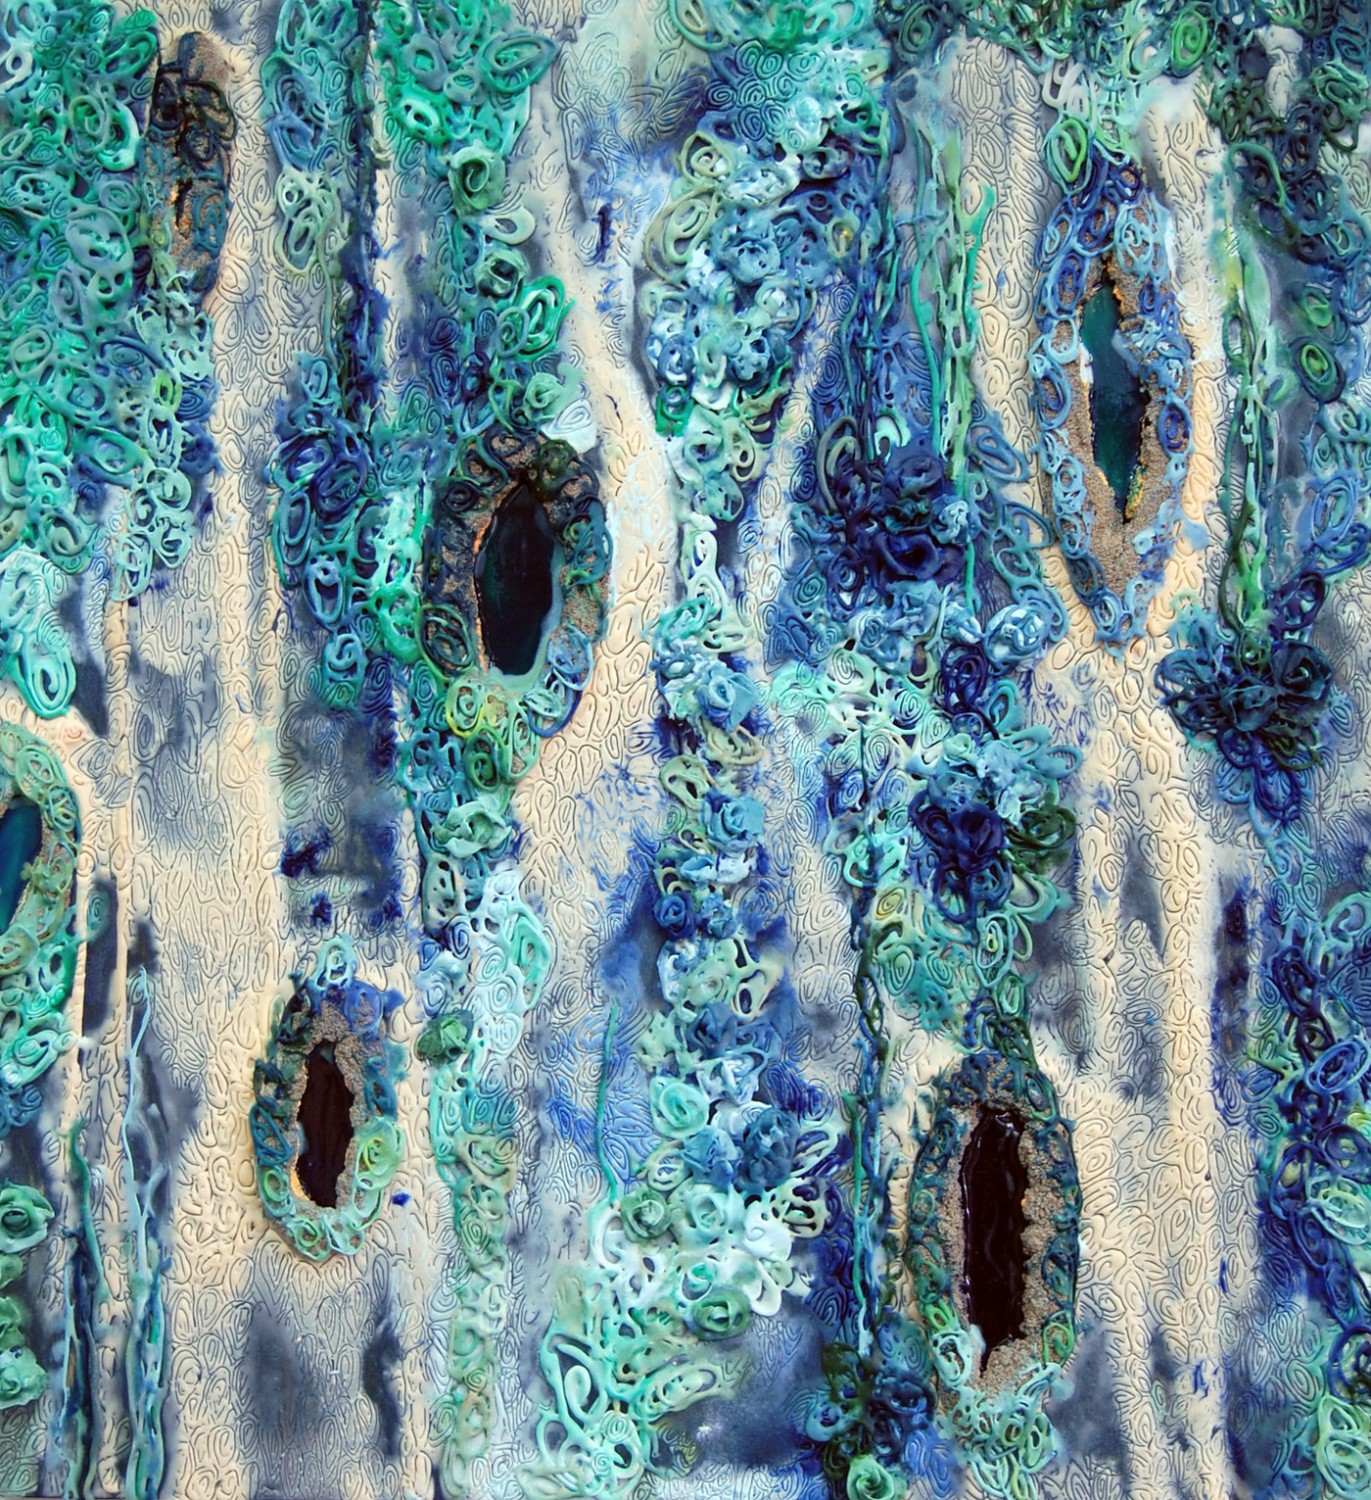 Sea Cells V, 2011, encaustic, glass beads, and urethane on panel